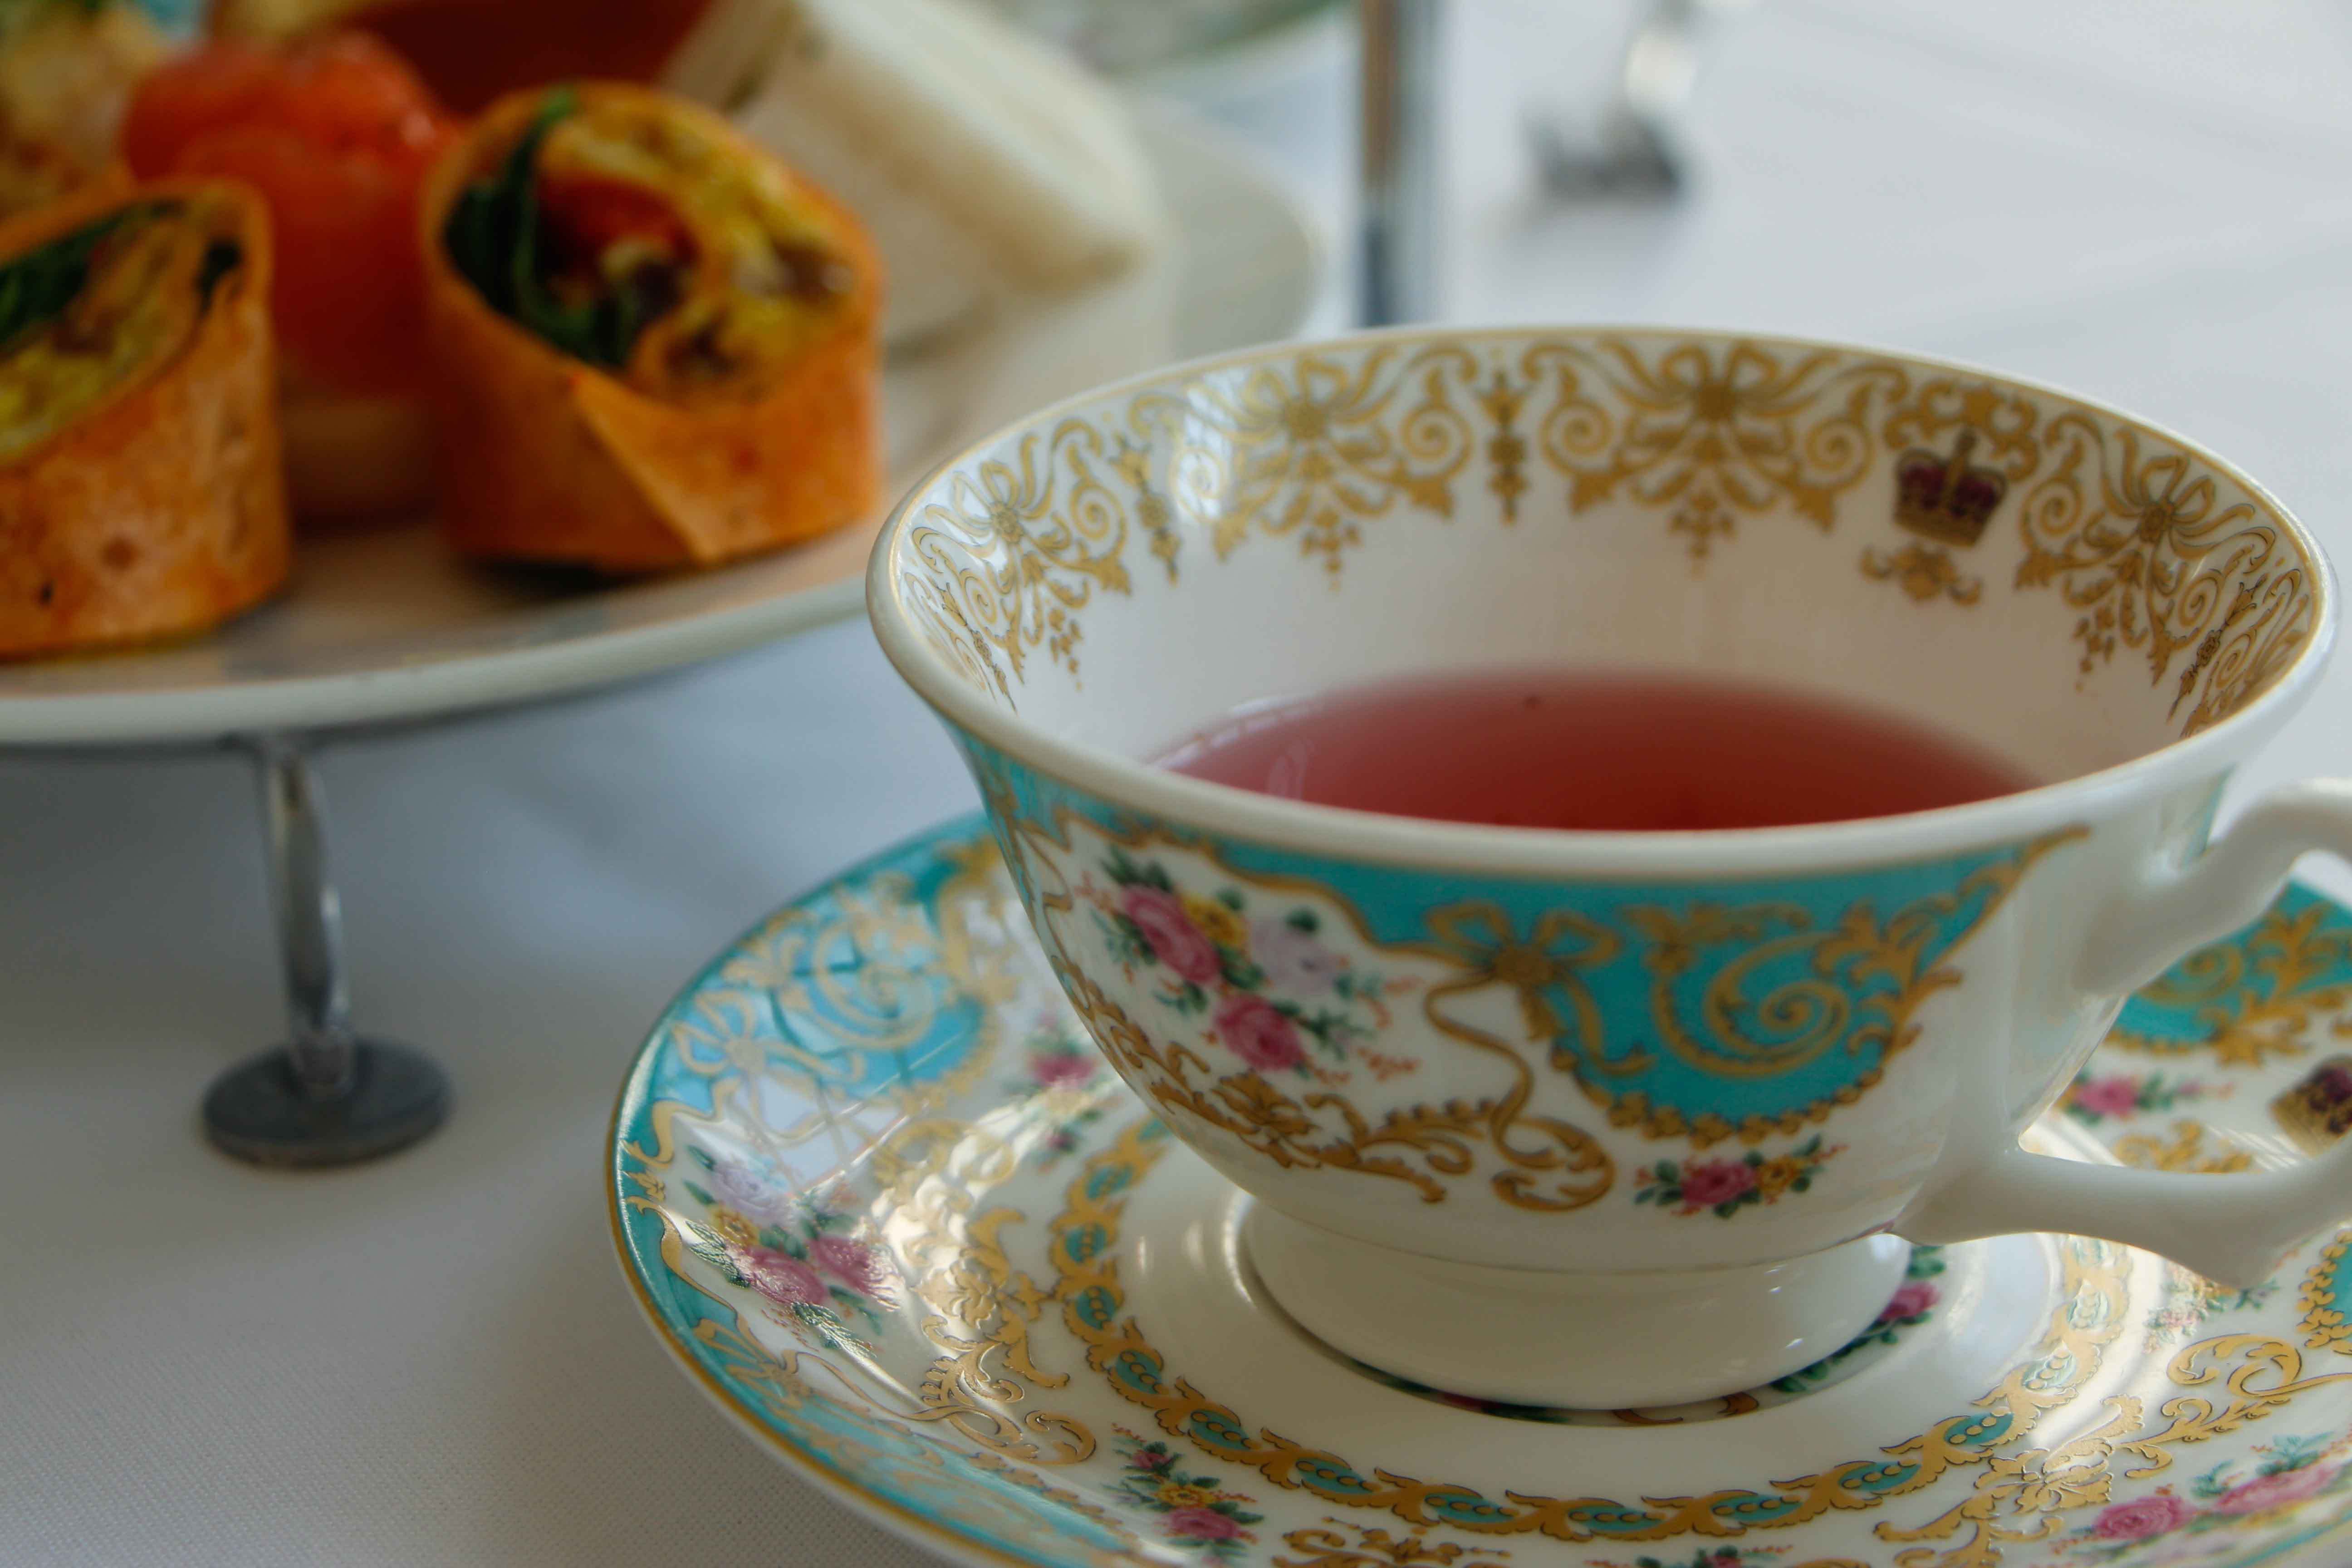 Unusual Places For Tea In London - The Travel Bite